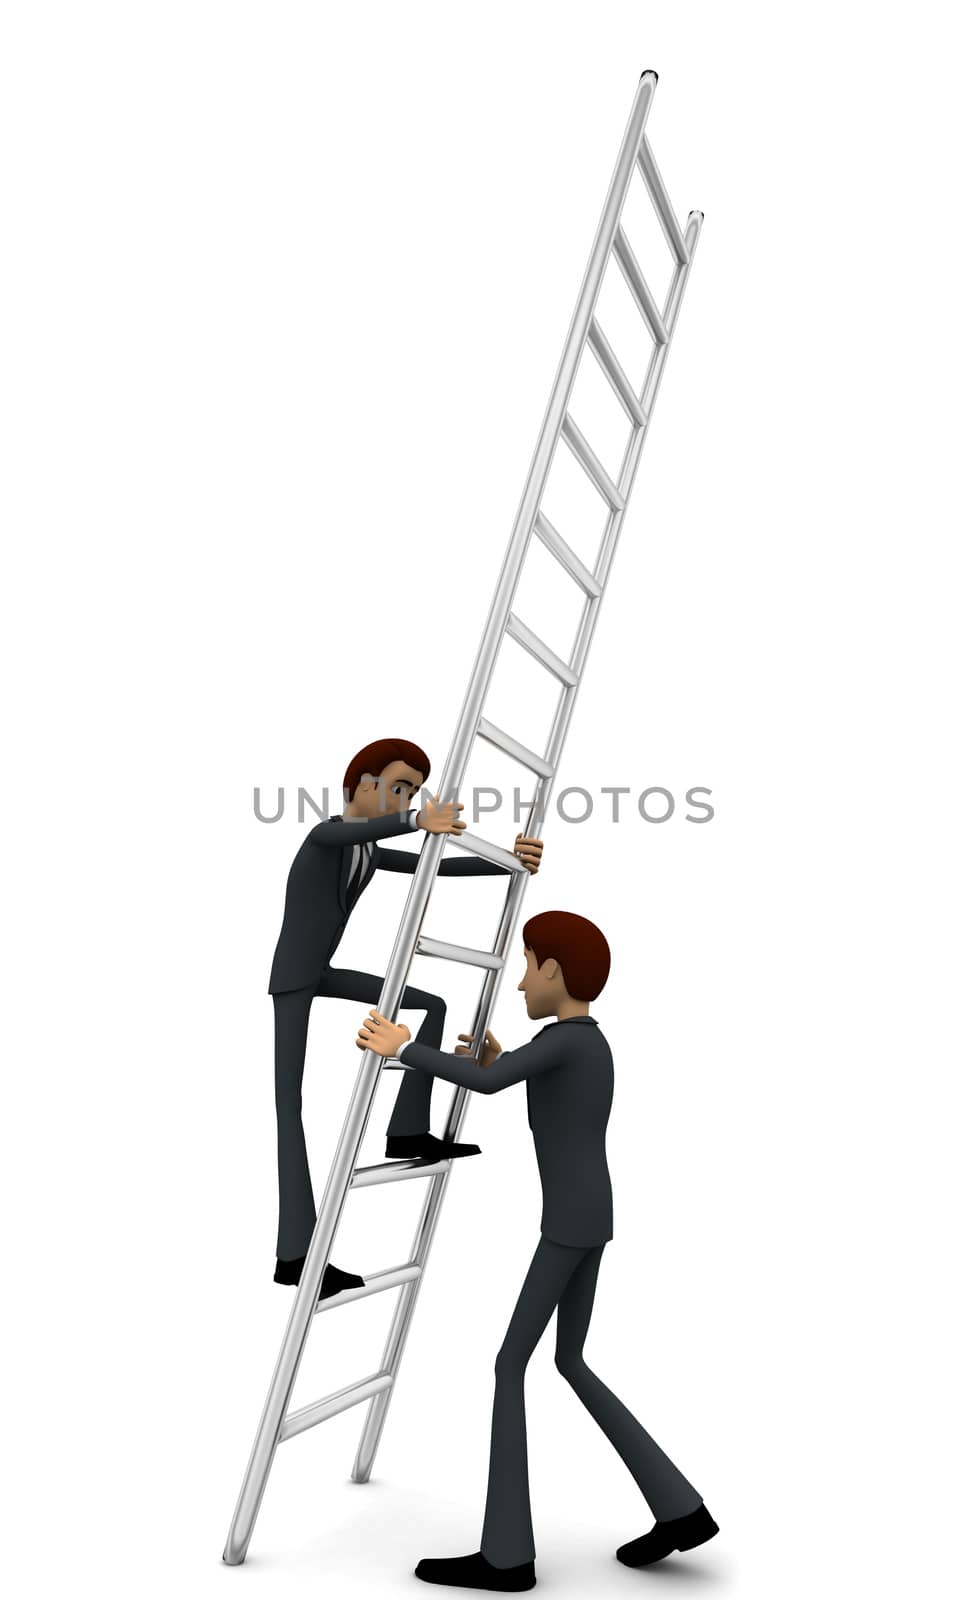 3d man climbing ladder supported by another man concept on white background, front angle view